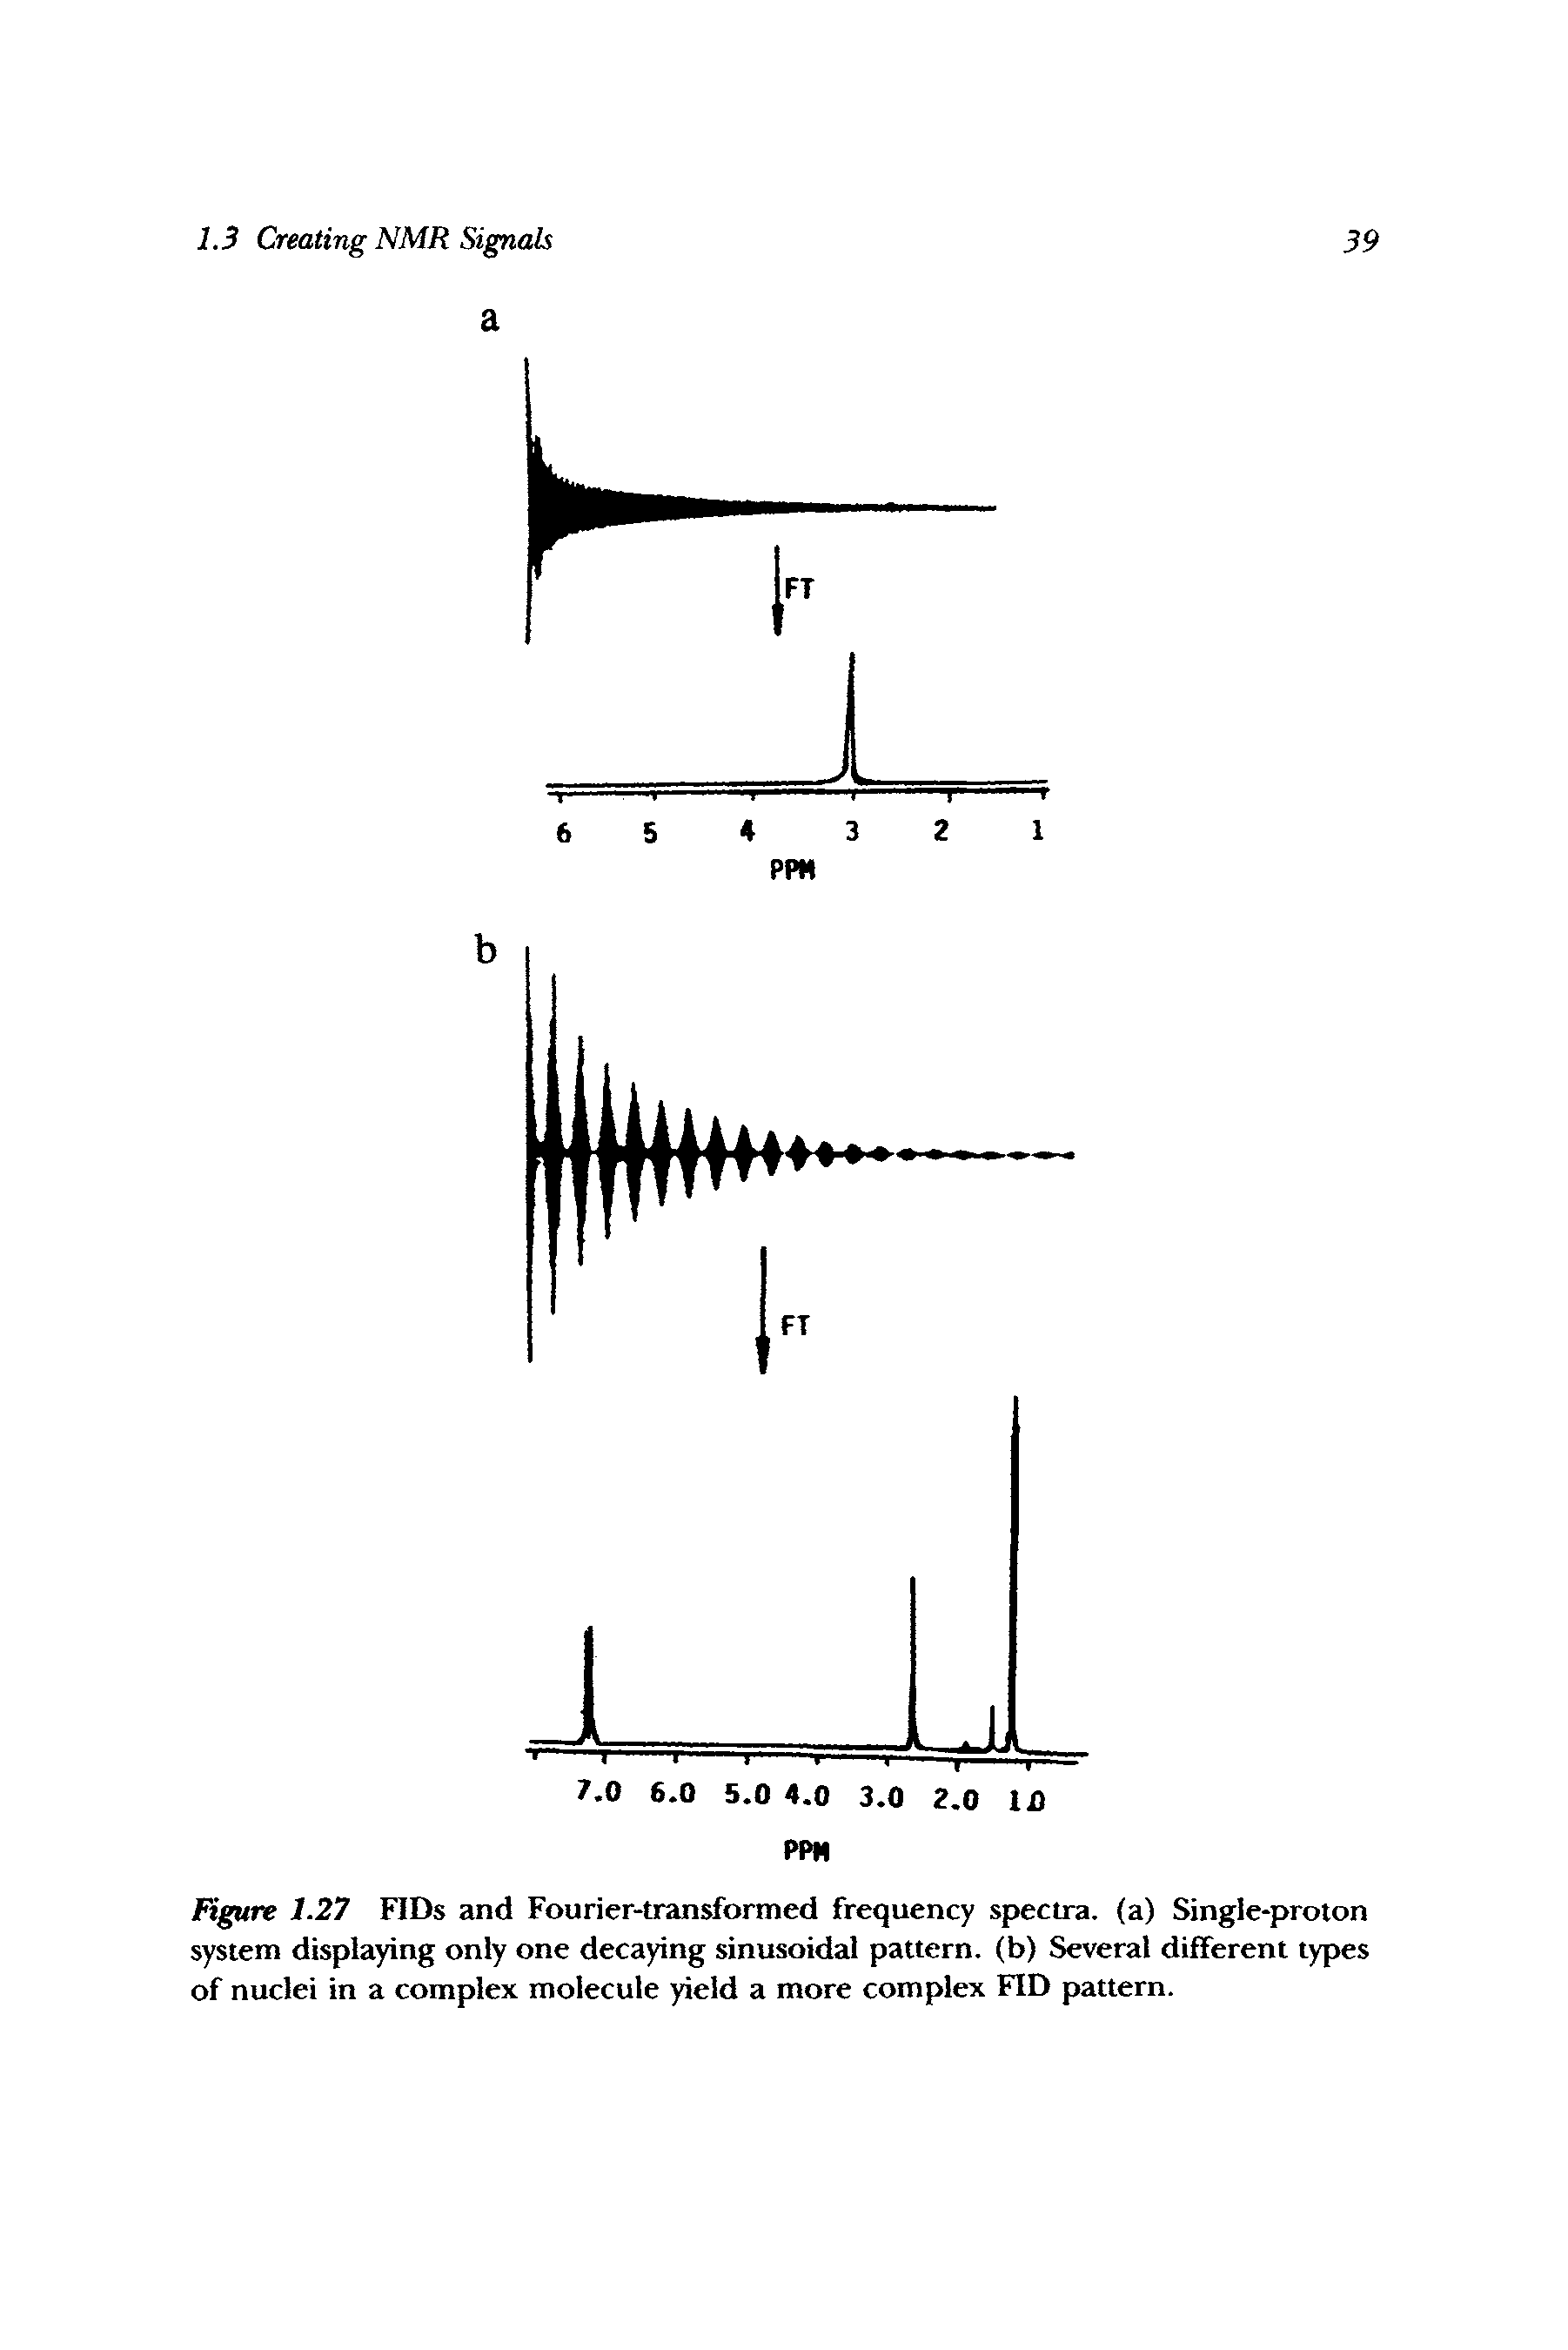 Figure 1.27 FIDs and Fourier-transformed frequency spectra, (a) Single-proton system displaying only one decaying sinusoidal pattern, (b) Several different types of nuclei in a complex molecule yield a more complex FID pattern.